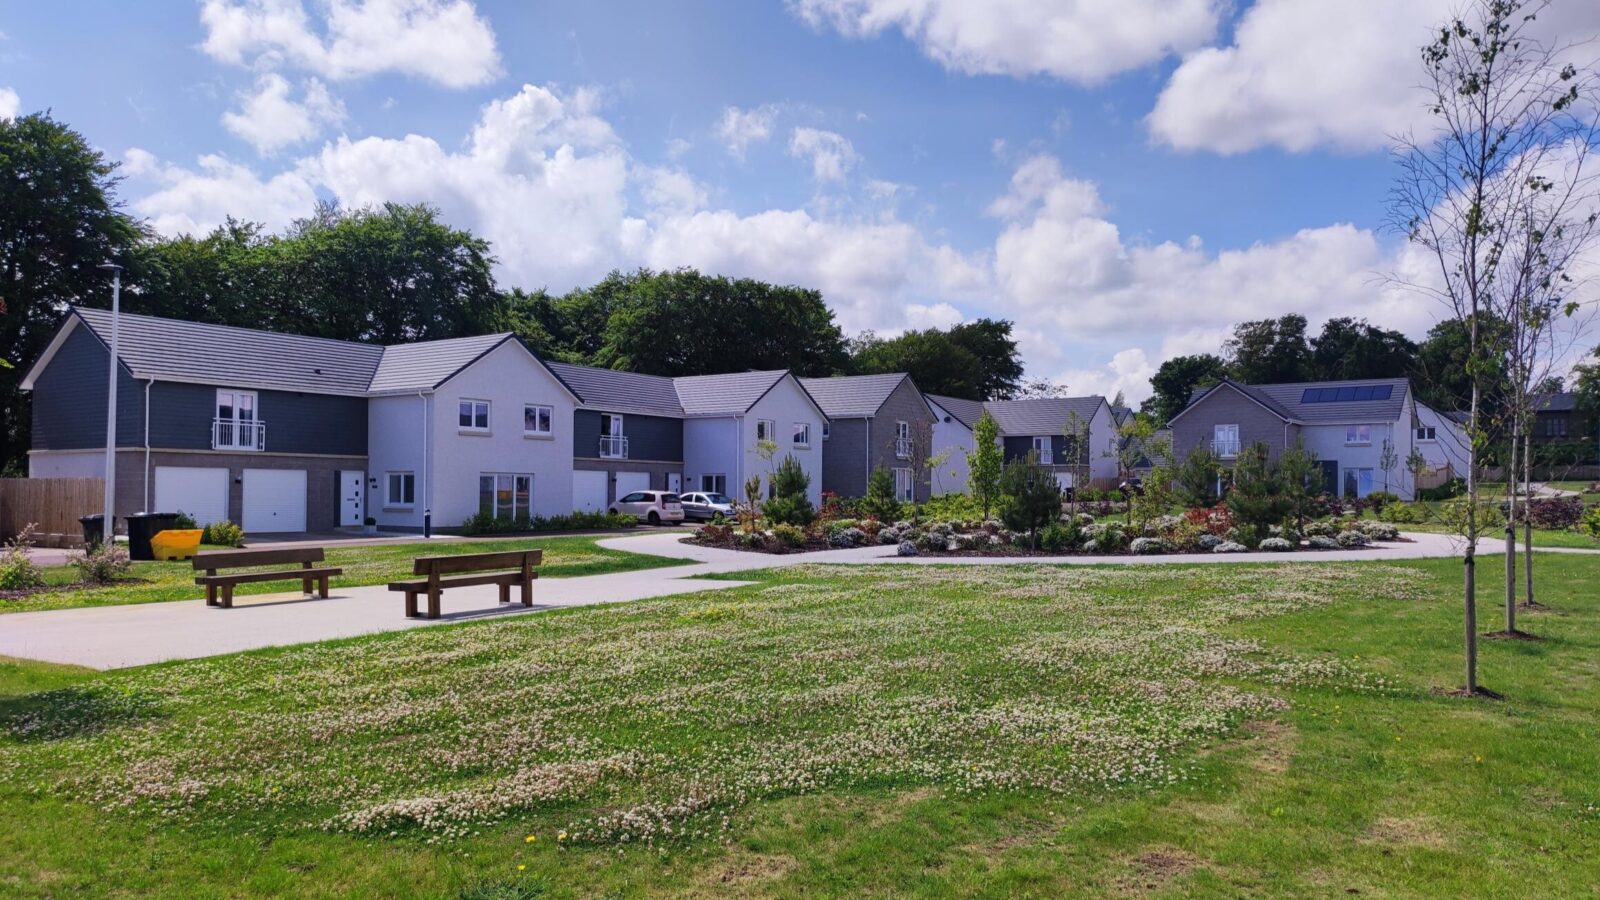 Bancon Homes announces key land acquisition to continue development in Strathaven